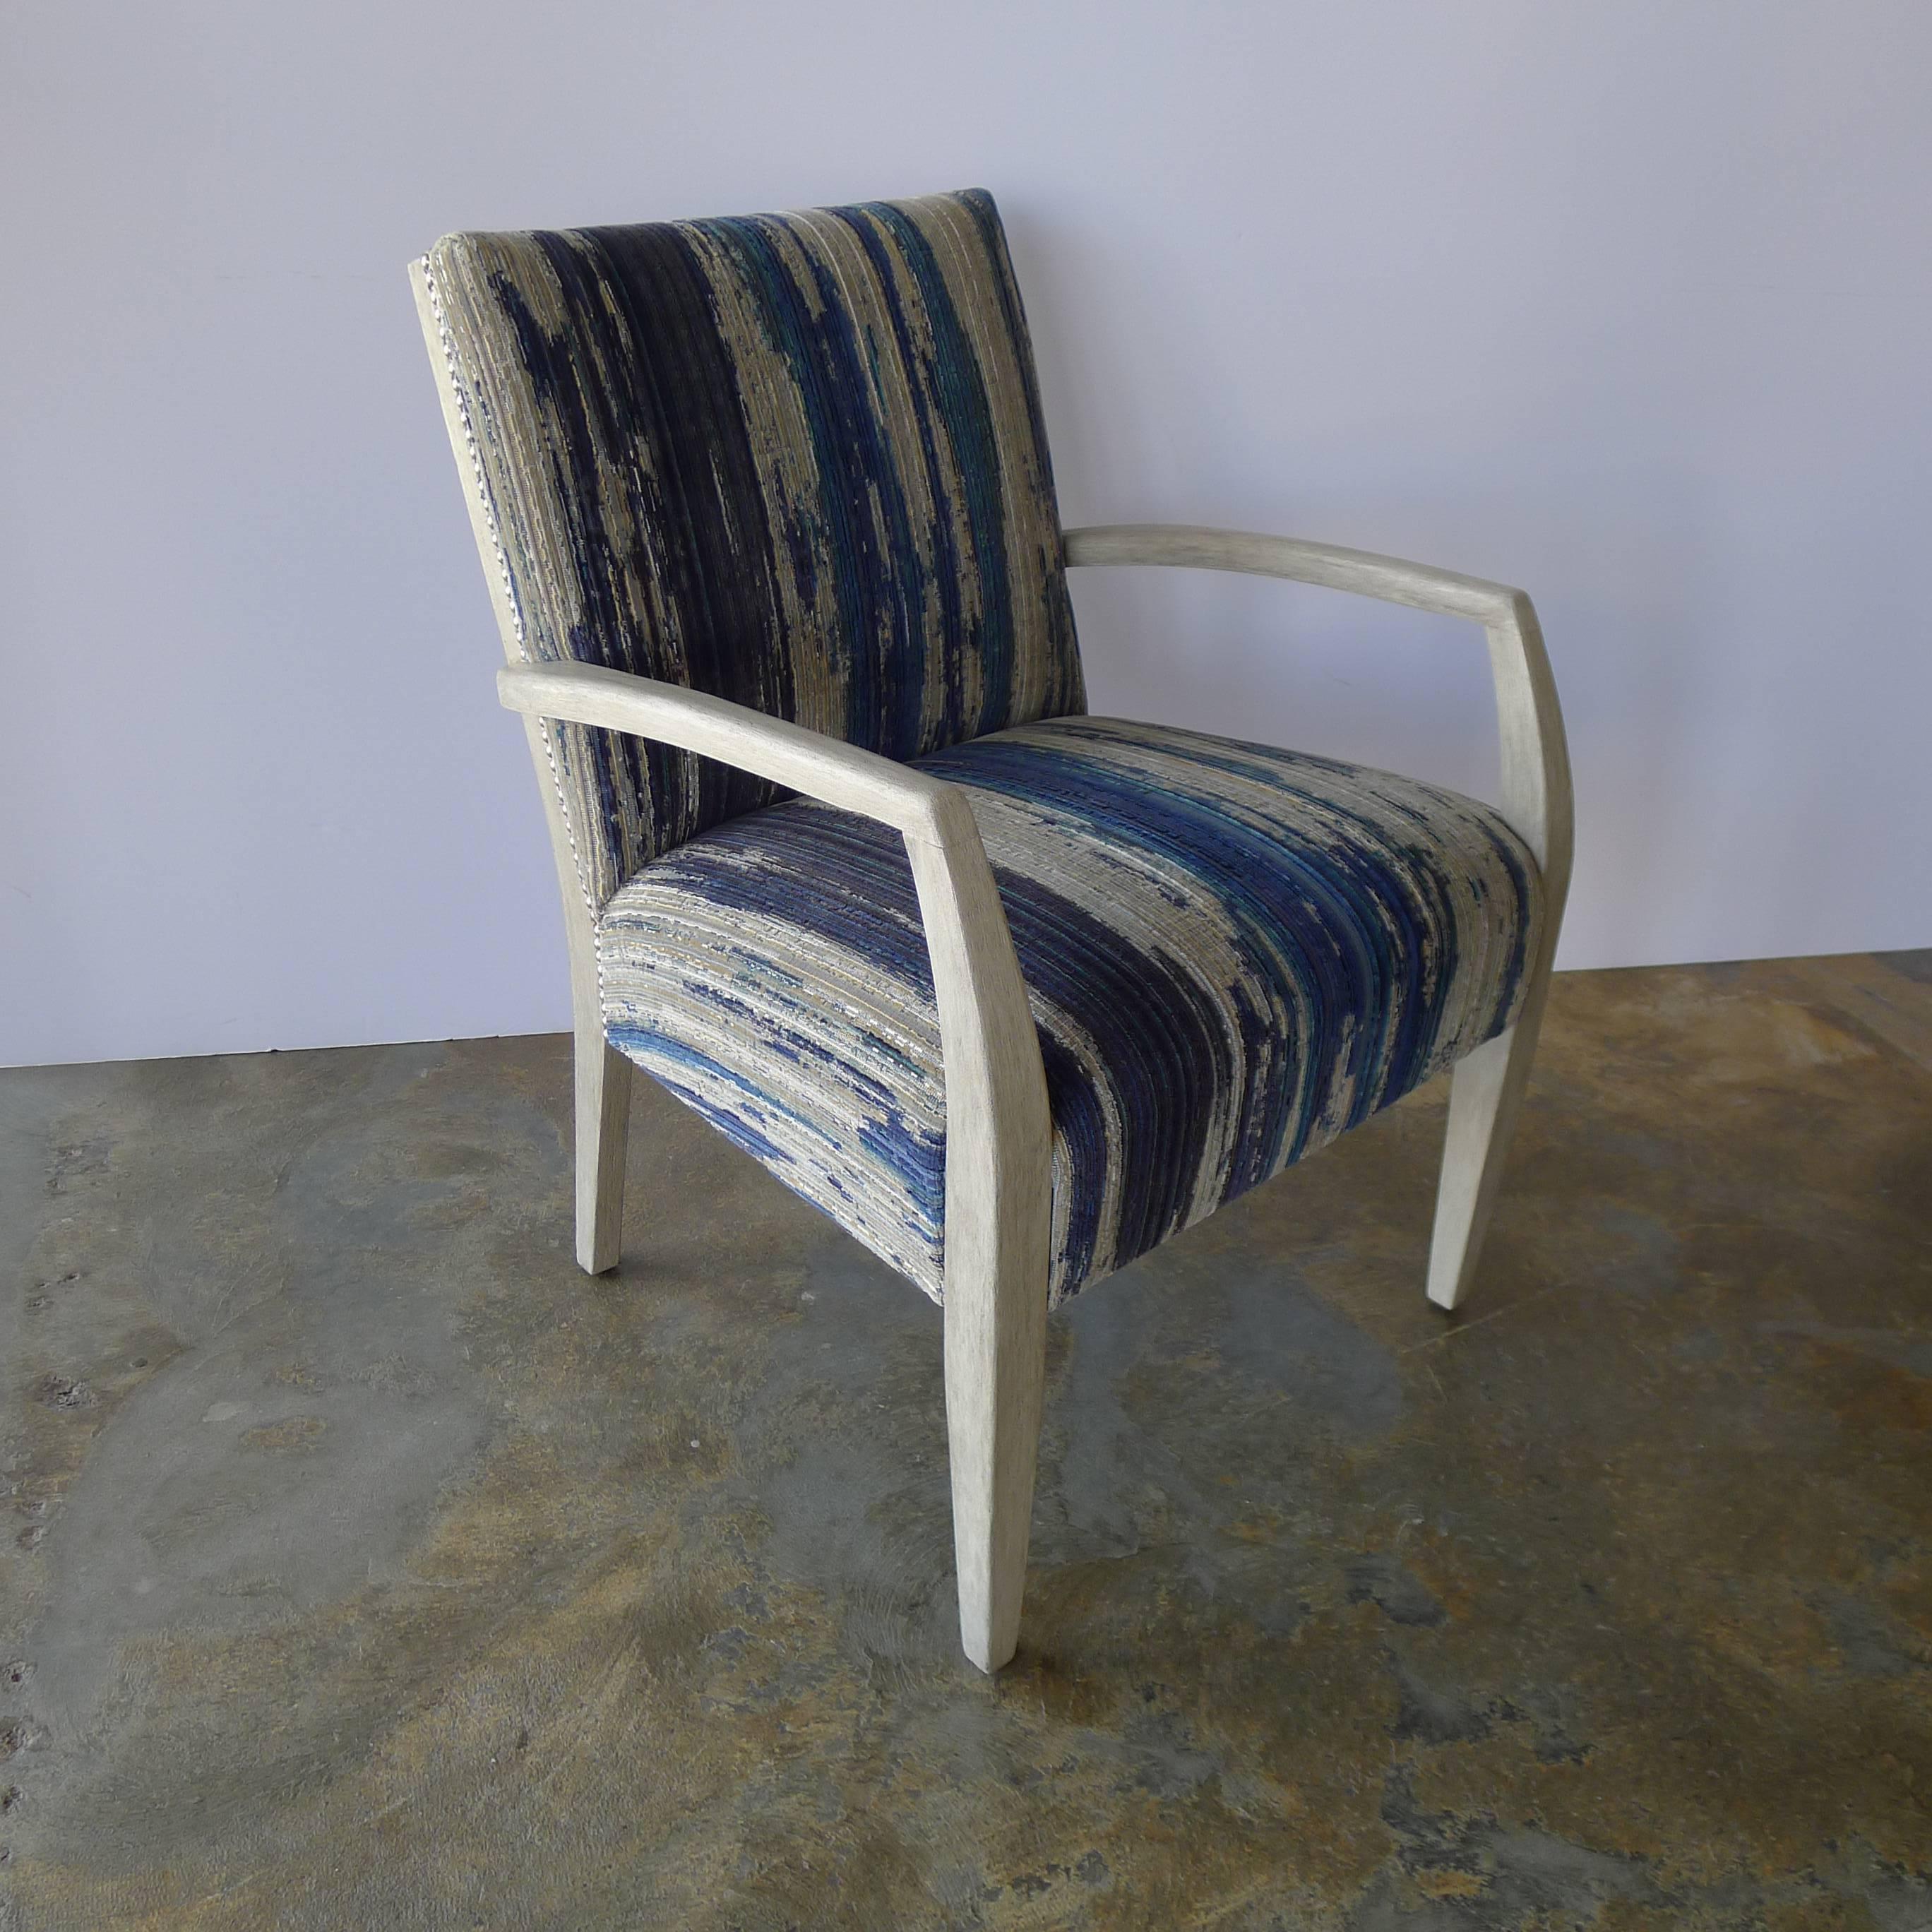 Totally restored early Mid-Century occasional, lounge chair with new Pollack upholstery, satin nickel nailheads and light distressed gray finish. Comfortable and of good design.